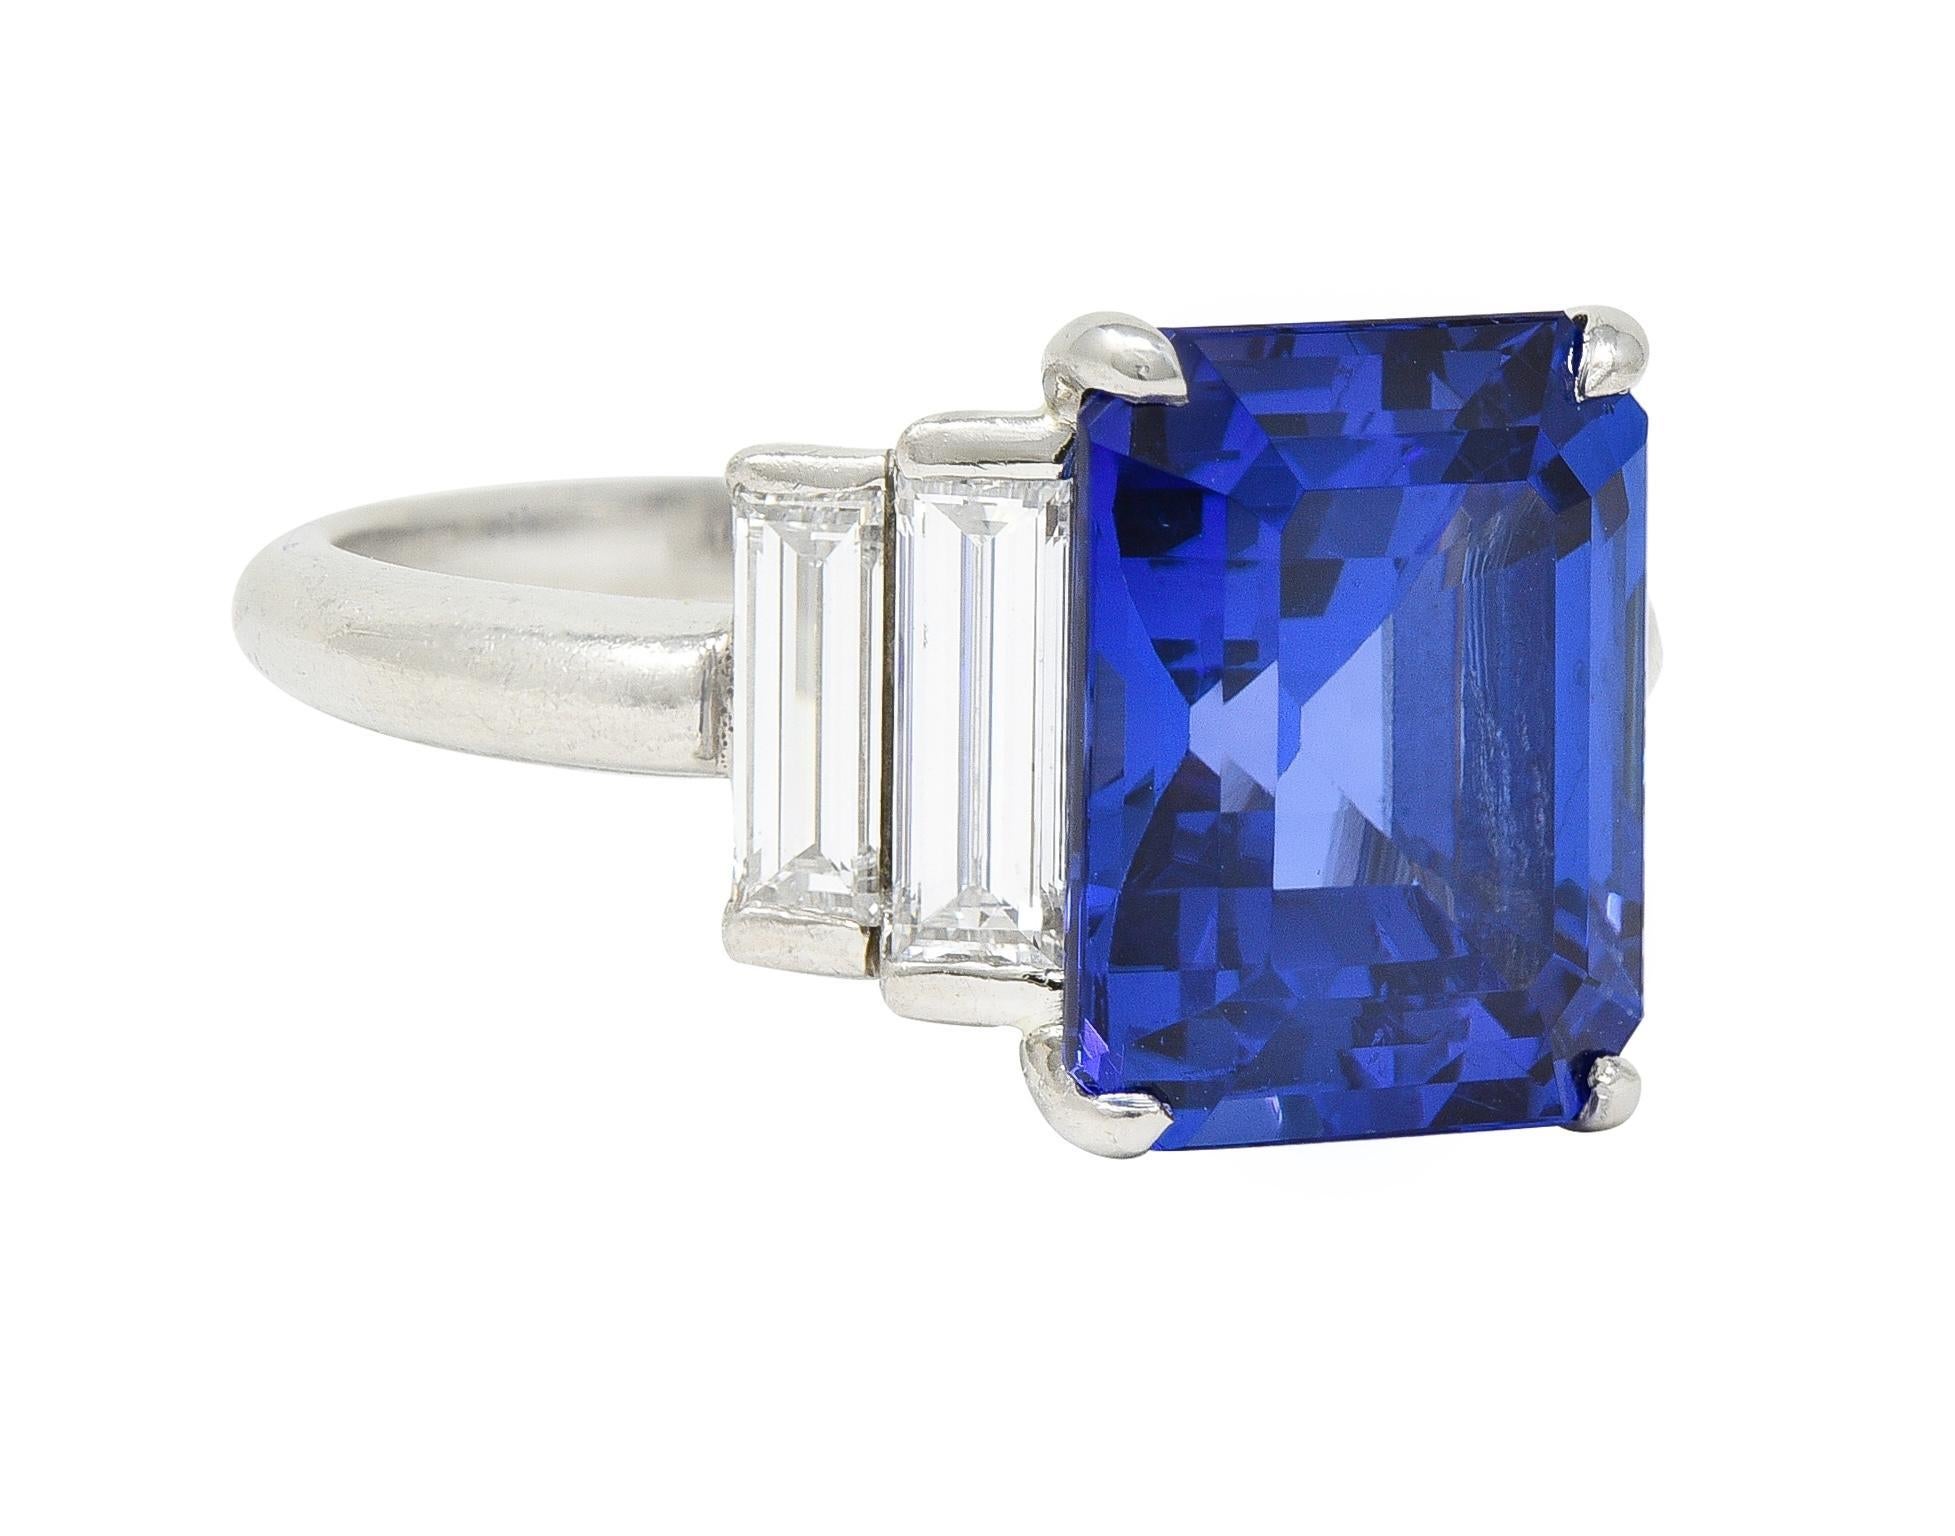 Centering an emerald cut tanzanite weighing 6.42 carats total - transparent medium violetish blue 
Prong set in basket and flanked by stepped shoulders bar set with baguette cut diamonds 
Weighing 1.50 carats total - E/F color with VS1 clarity